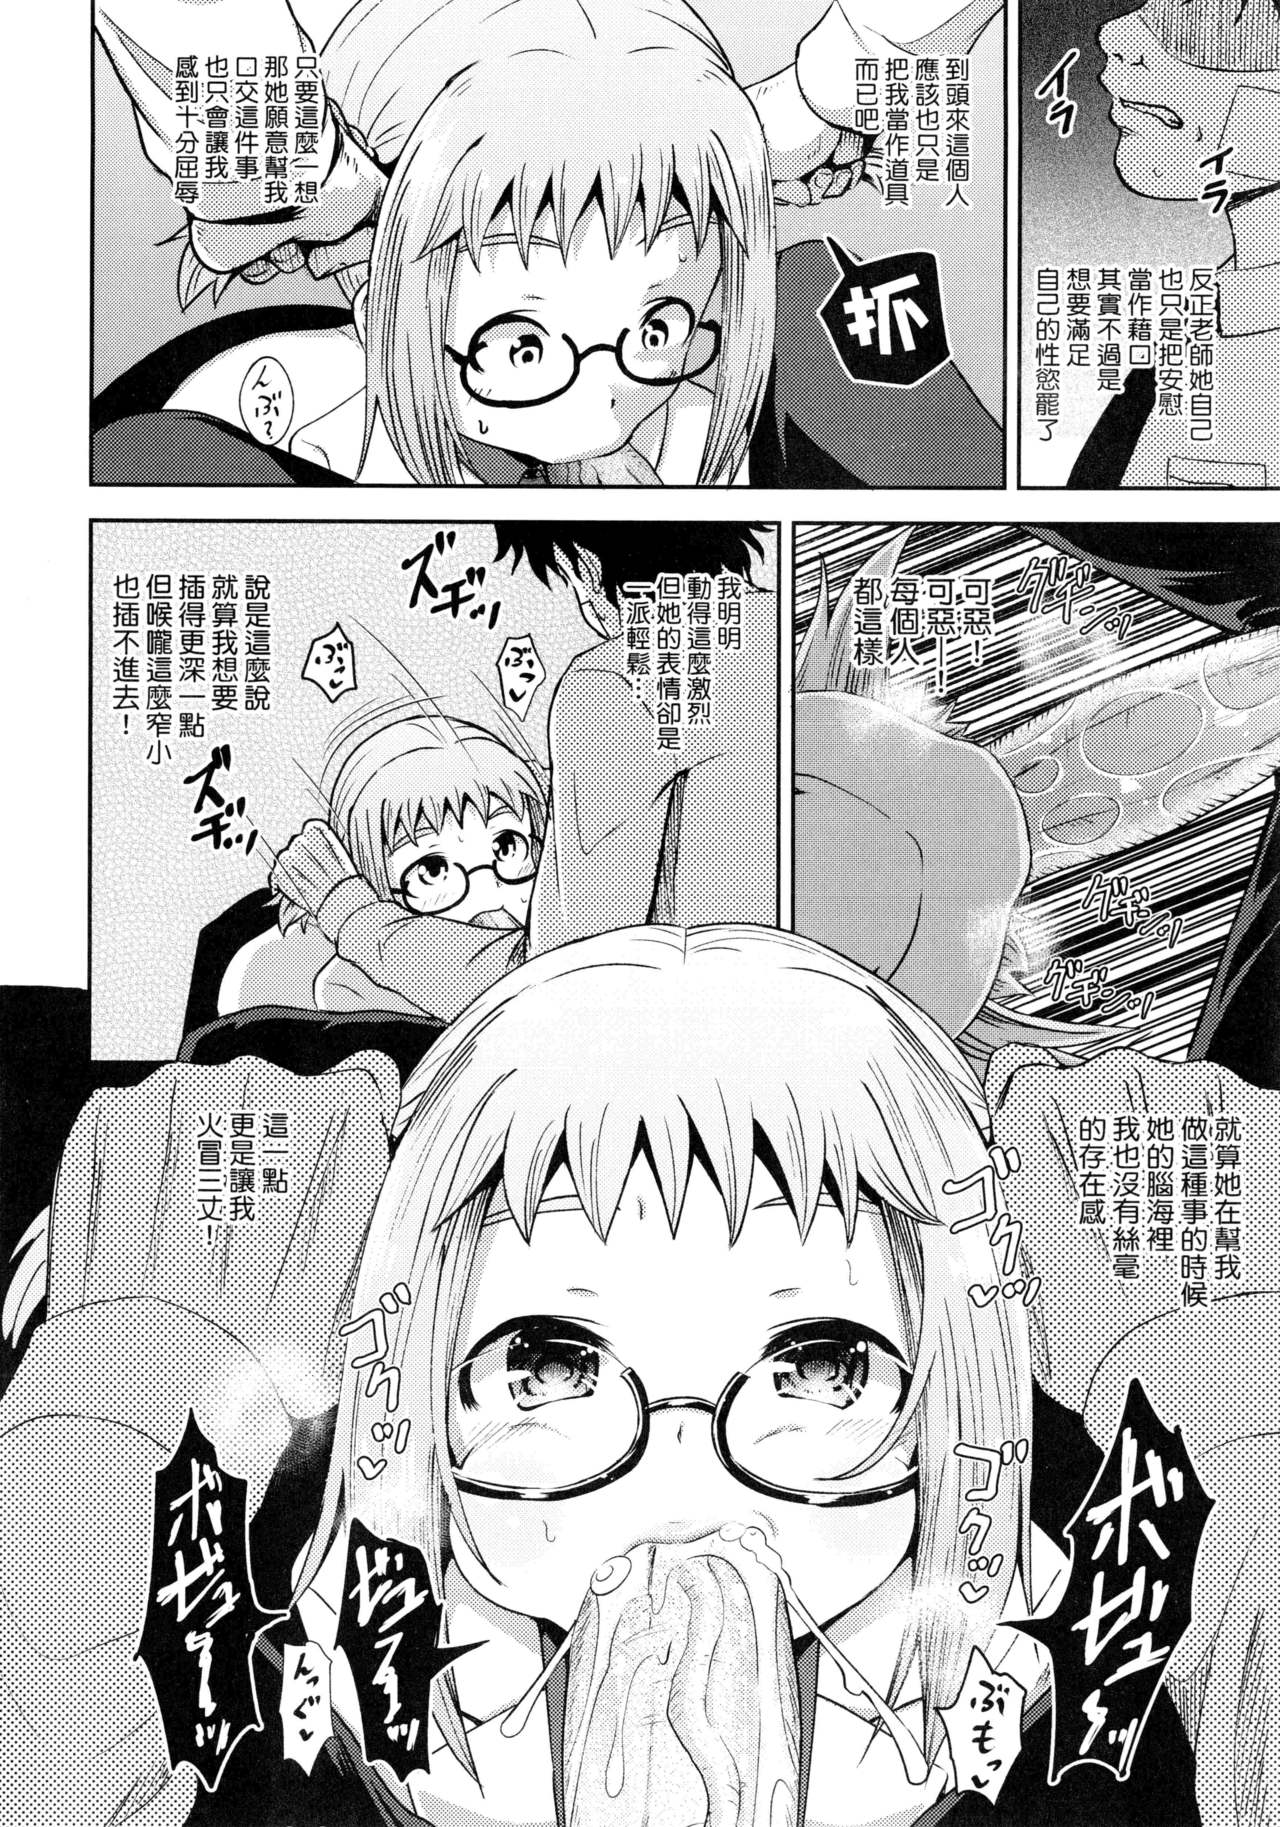 [Poncocchan] Saimin's Play | 強制催眠噴霧 [Chinese]  [Decensored] page 11 full